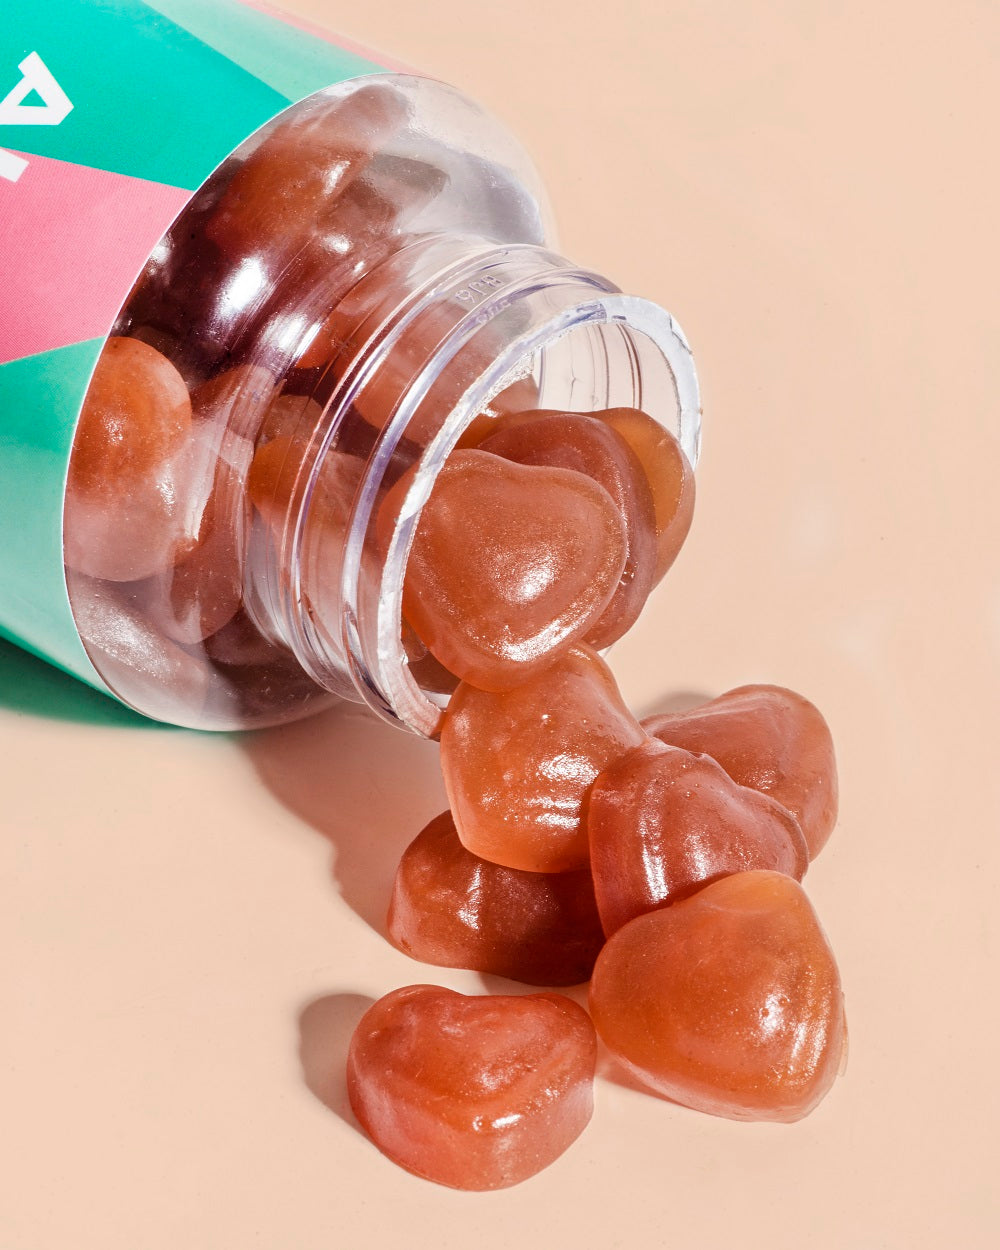 Complete-PMS-Heart-shaped-vitamins-spilling-out-of-bottle-to-show-texture-and-quality